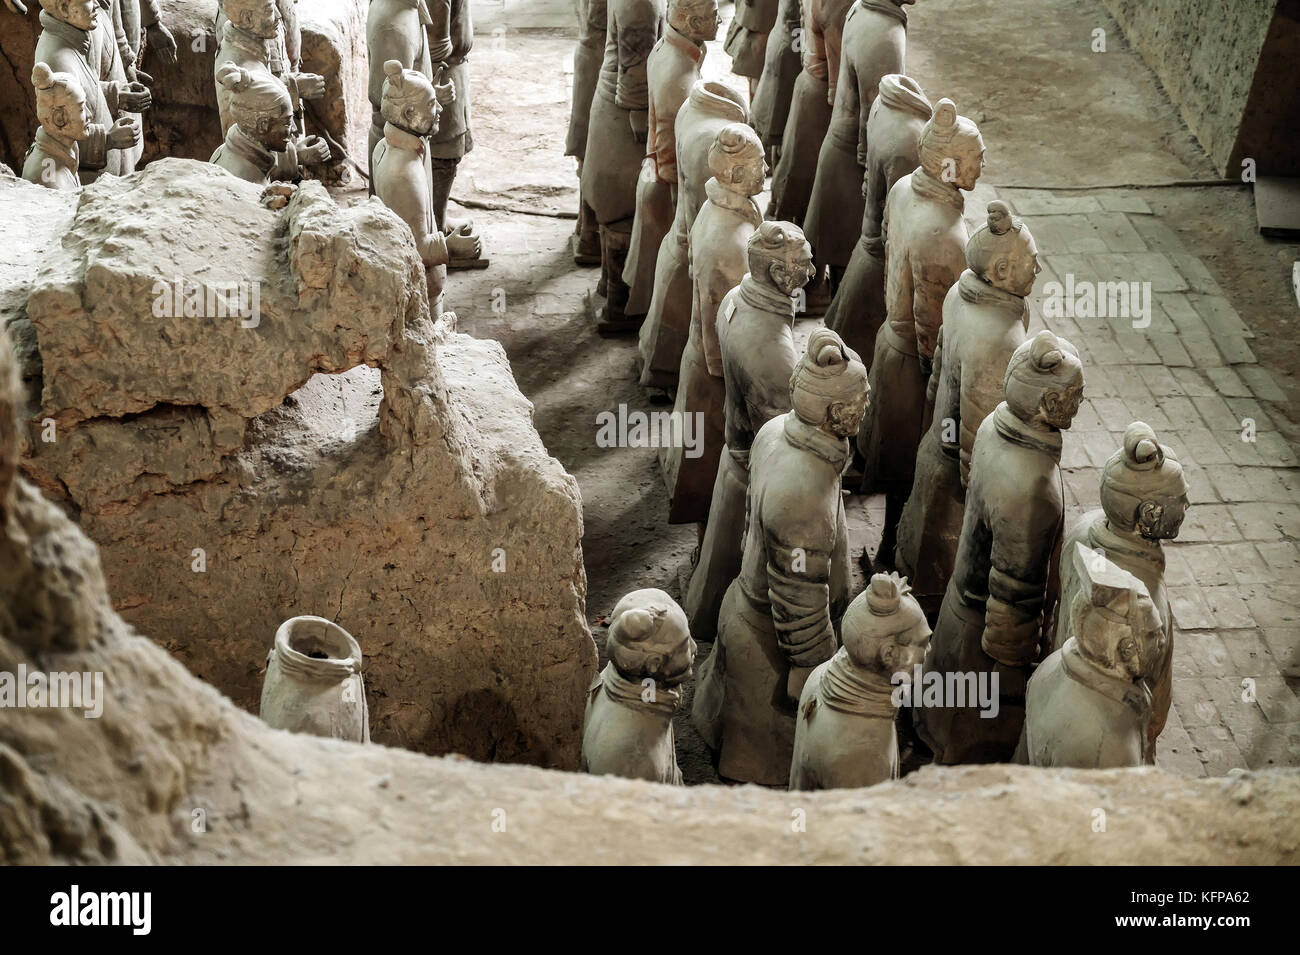 Tomb of ancient Chinese emperors: Terracotta Warriors and Horses. Has been more than 2,200 years ago. Stock Photo